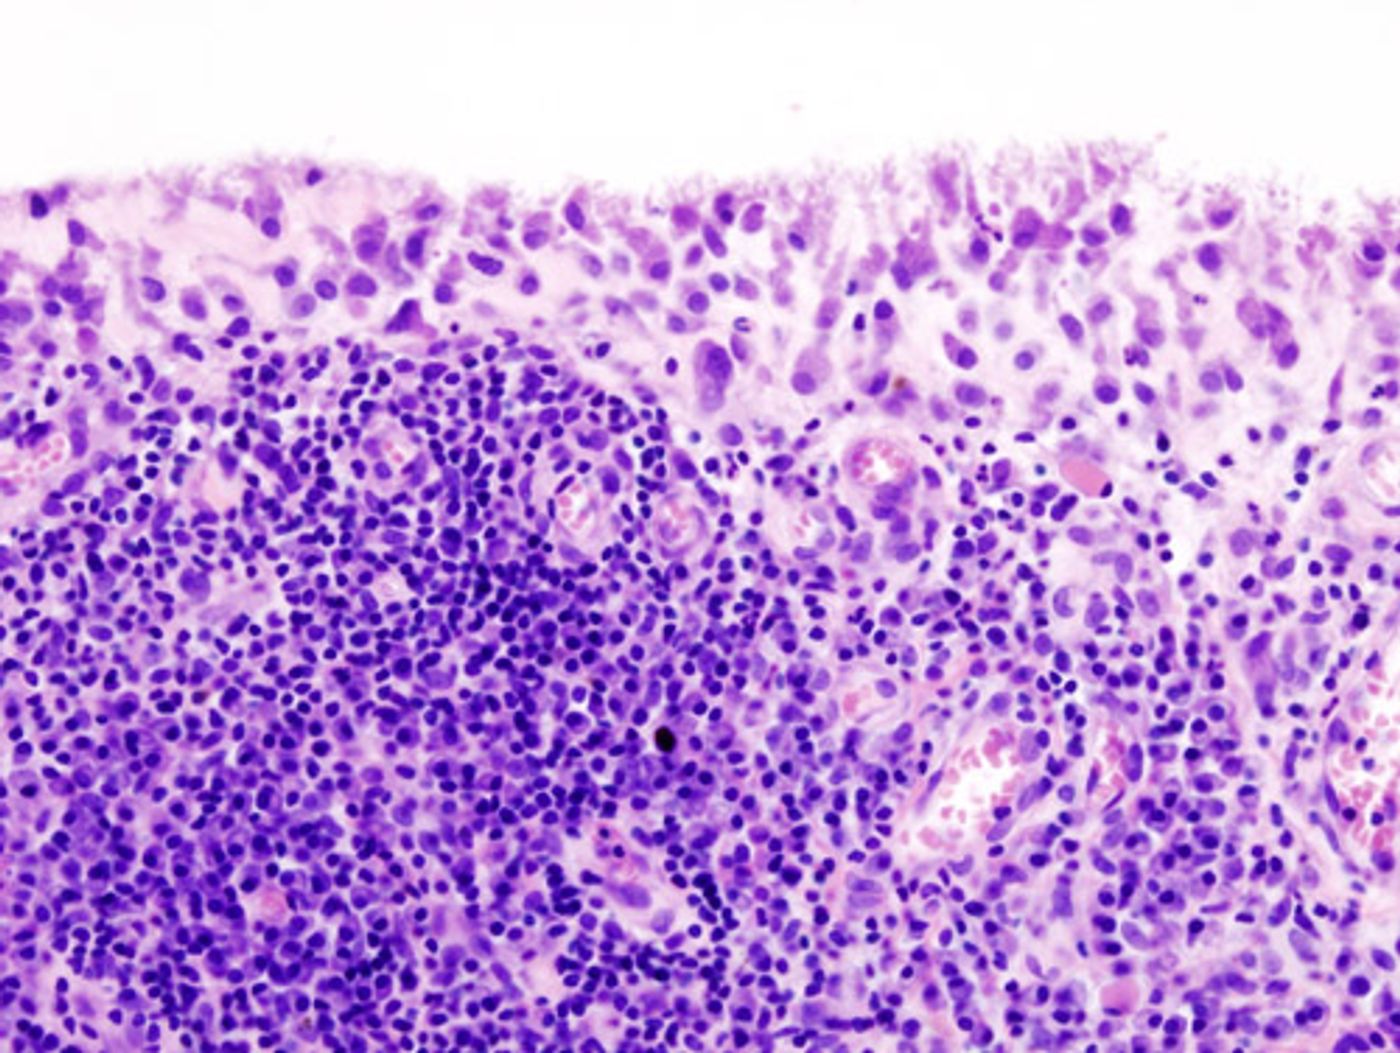 Histopathology of chronic synovitis of the knee joint in a patient with rheumatoid arthritis. Credit: Wikimedia Commons User KGH